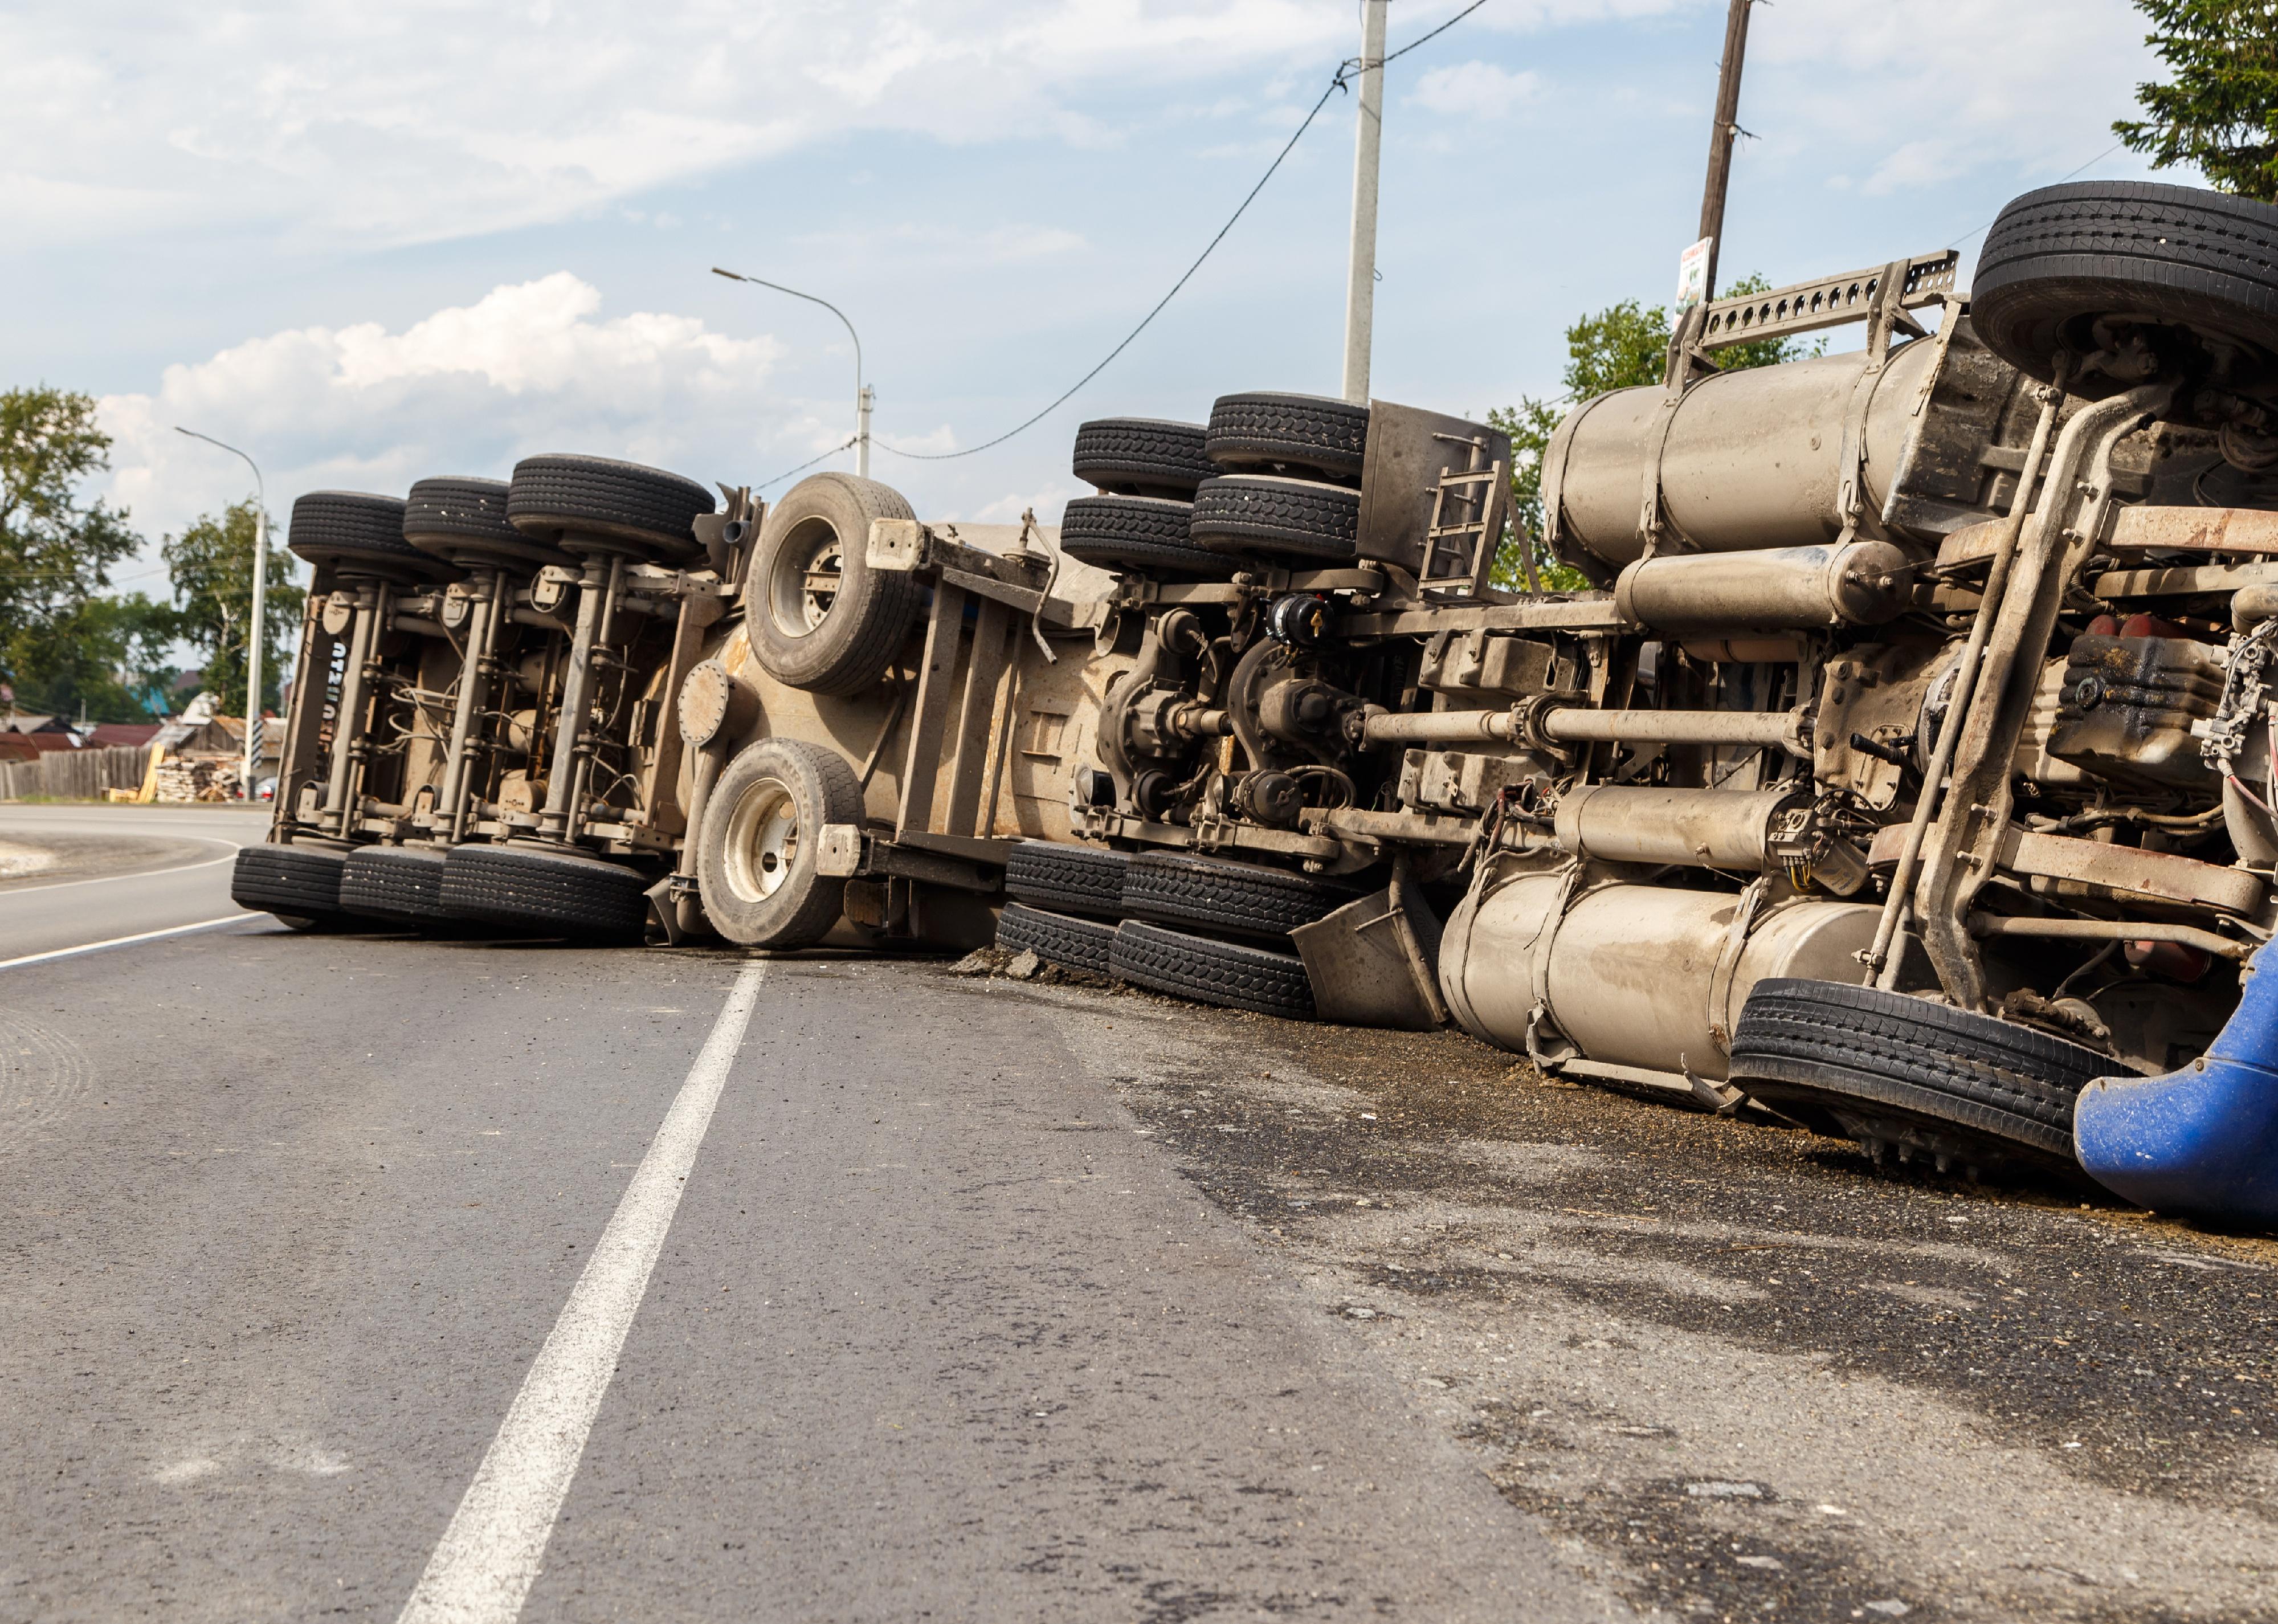 A view of an overturned truck on an highway.